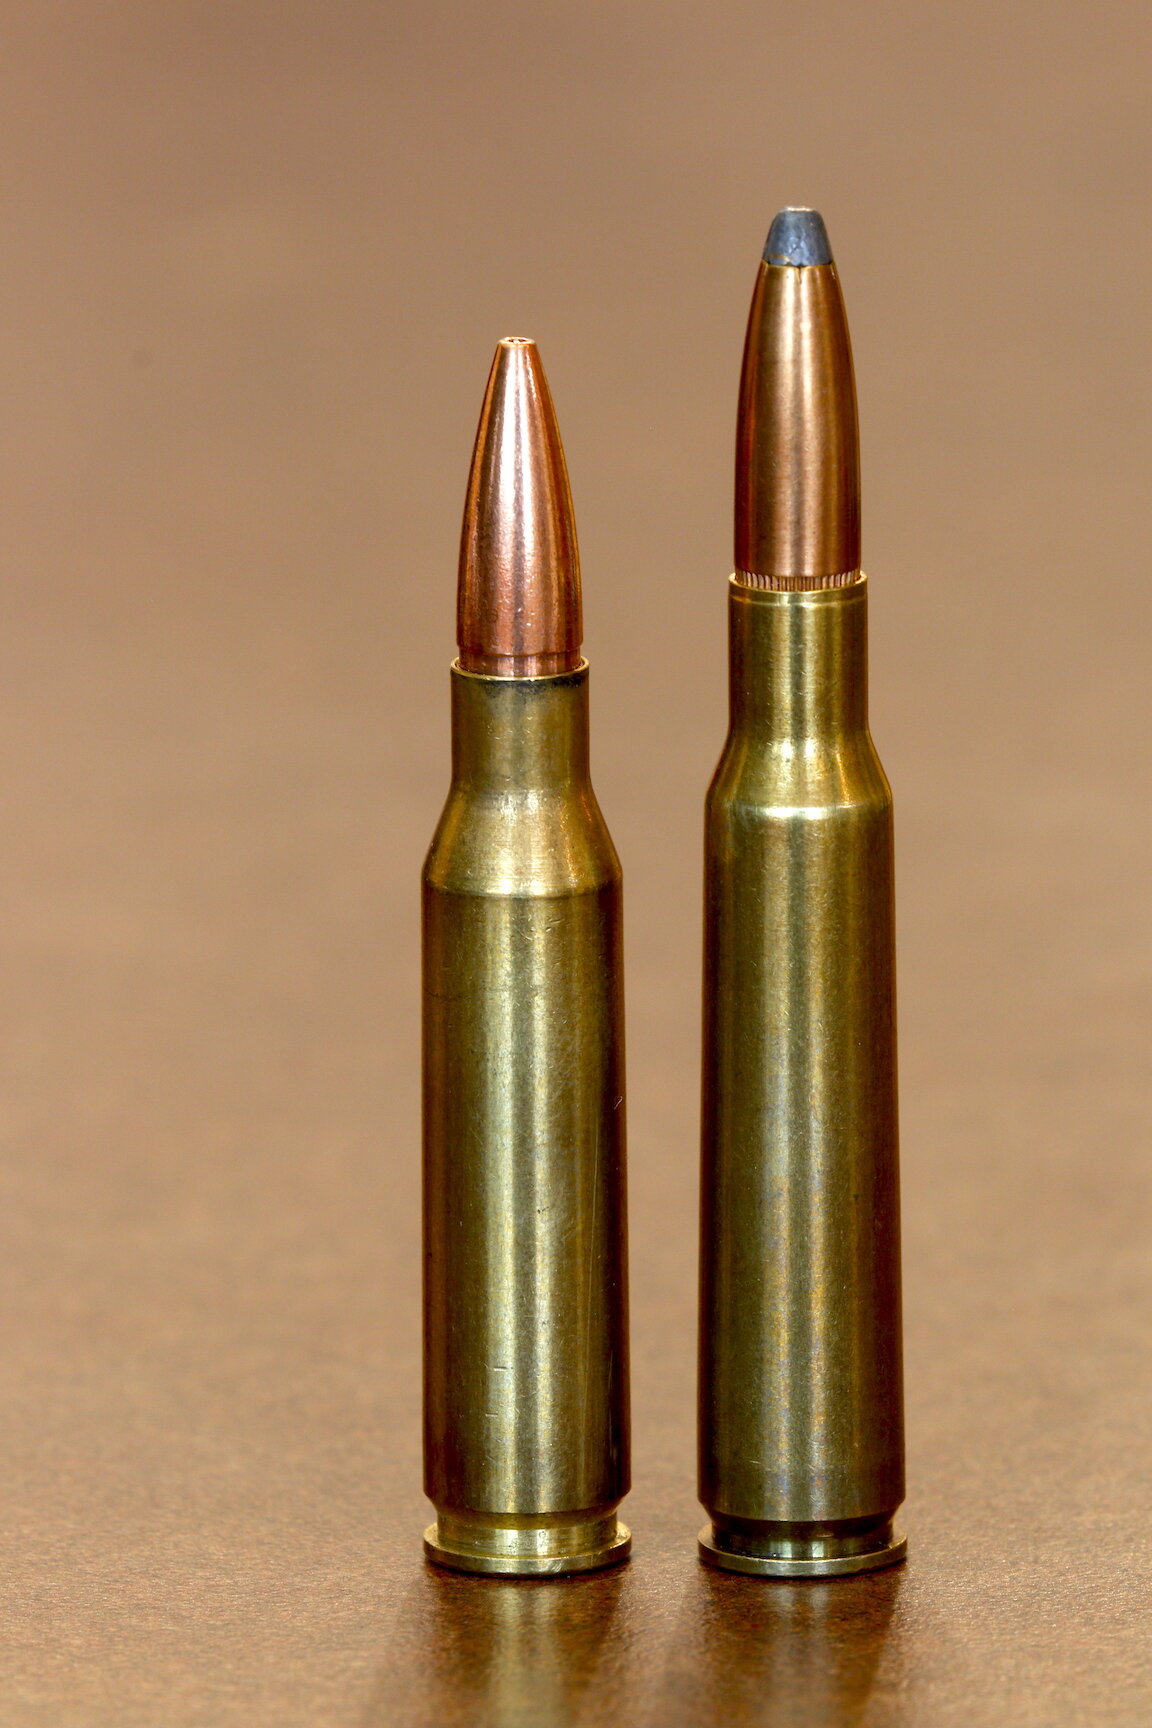 7mm-08 Remington cartridge beside a 7x57 Mauser, its distant cousin., as is the 270 Winchester. 